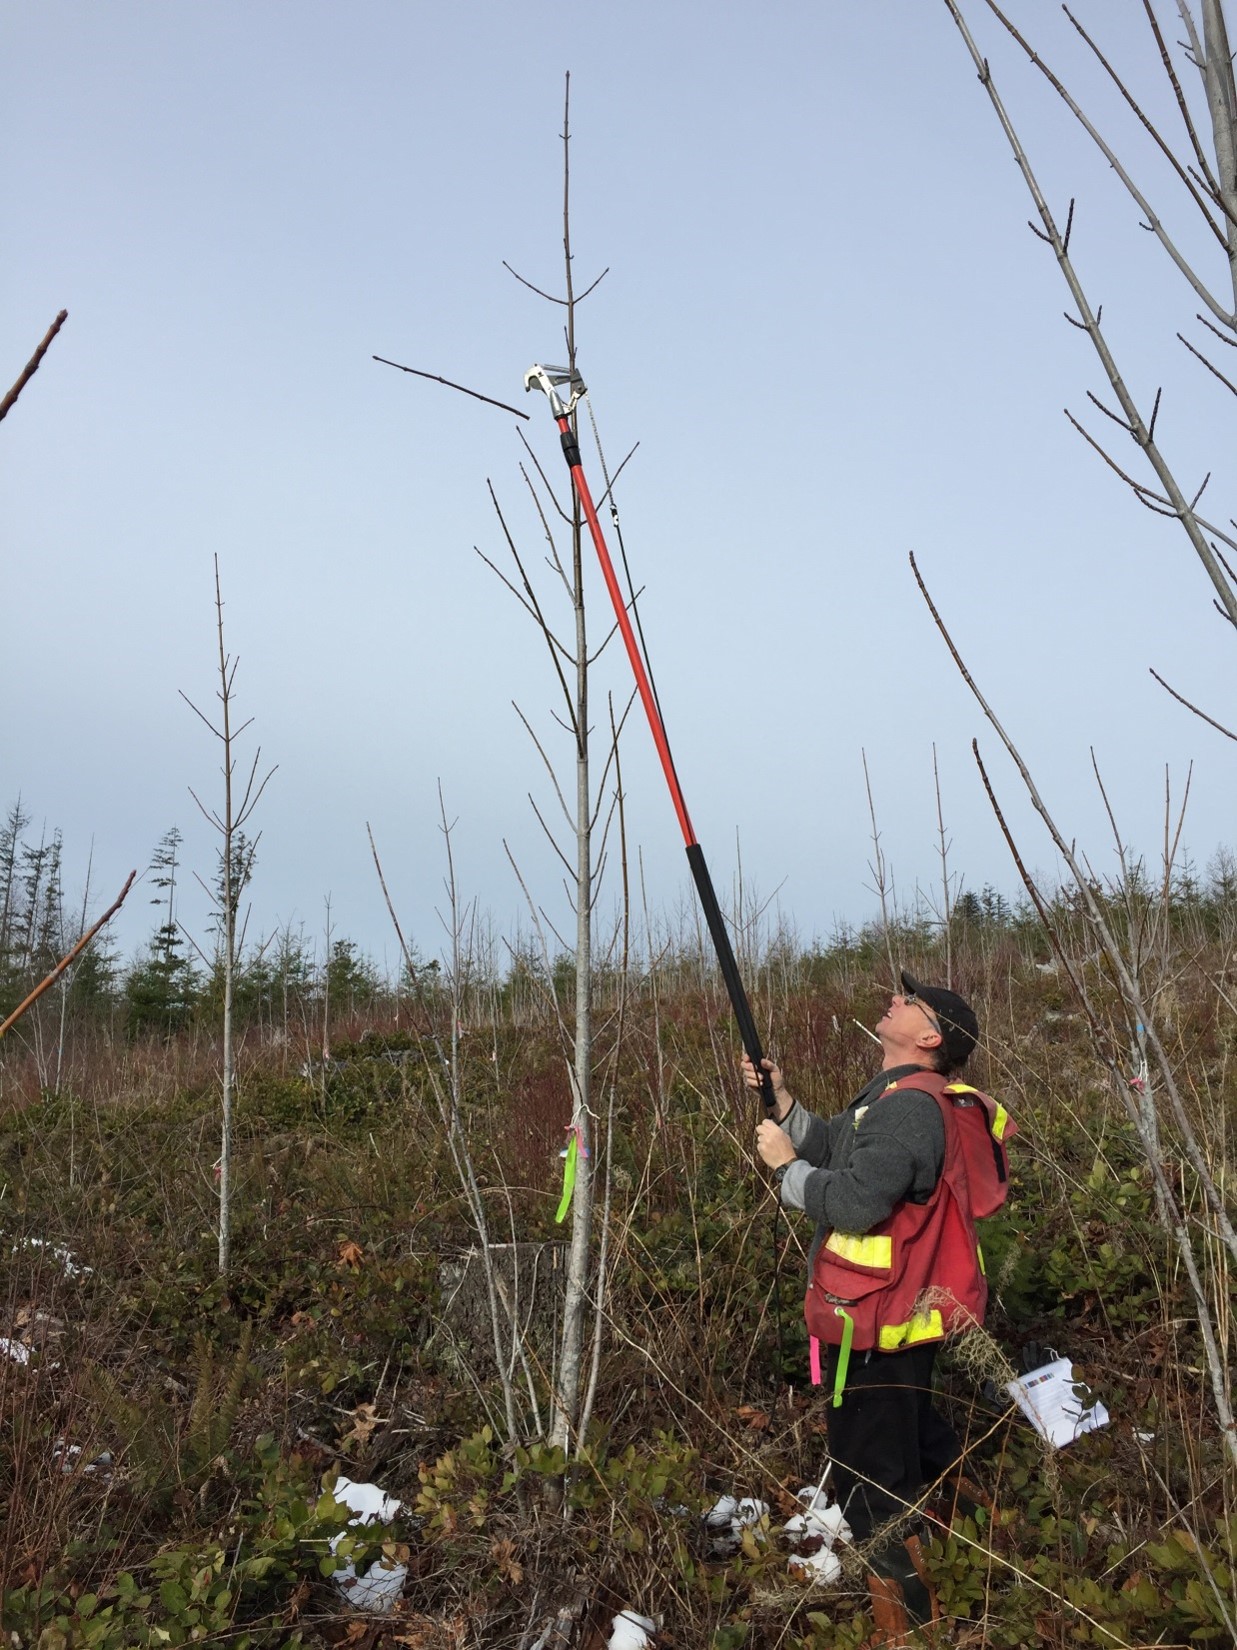 A researcher in an orange safety vest uses a snipper on a pole to cut twigs off the top of a 6-metre tall tree.